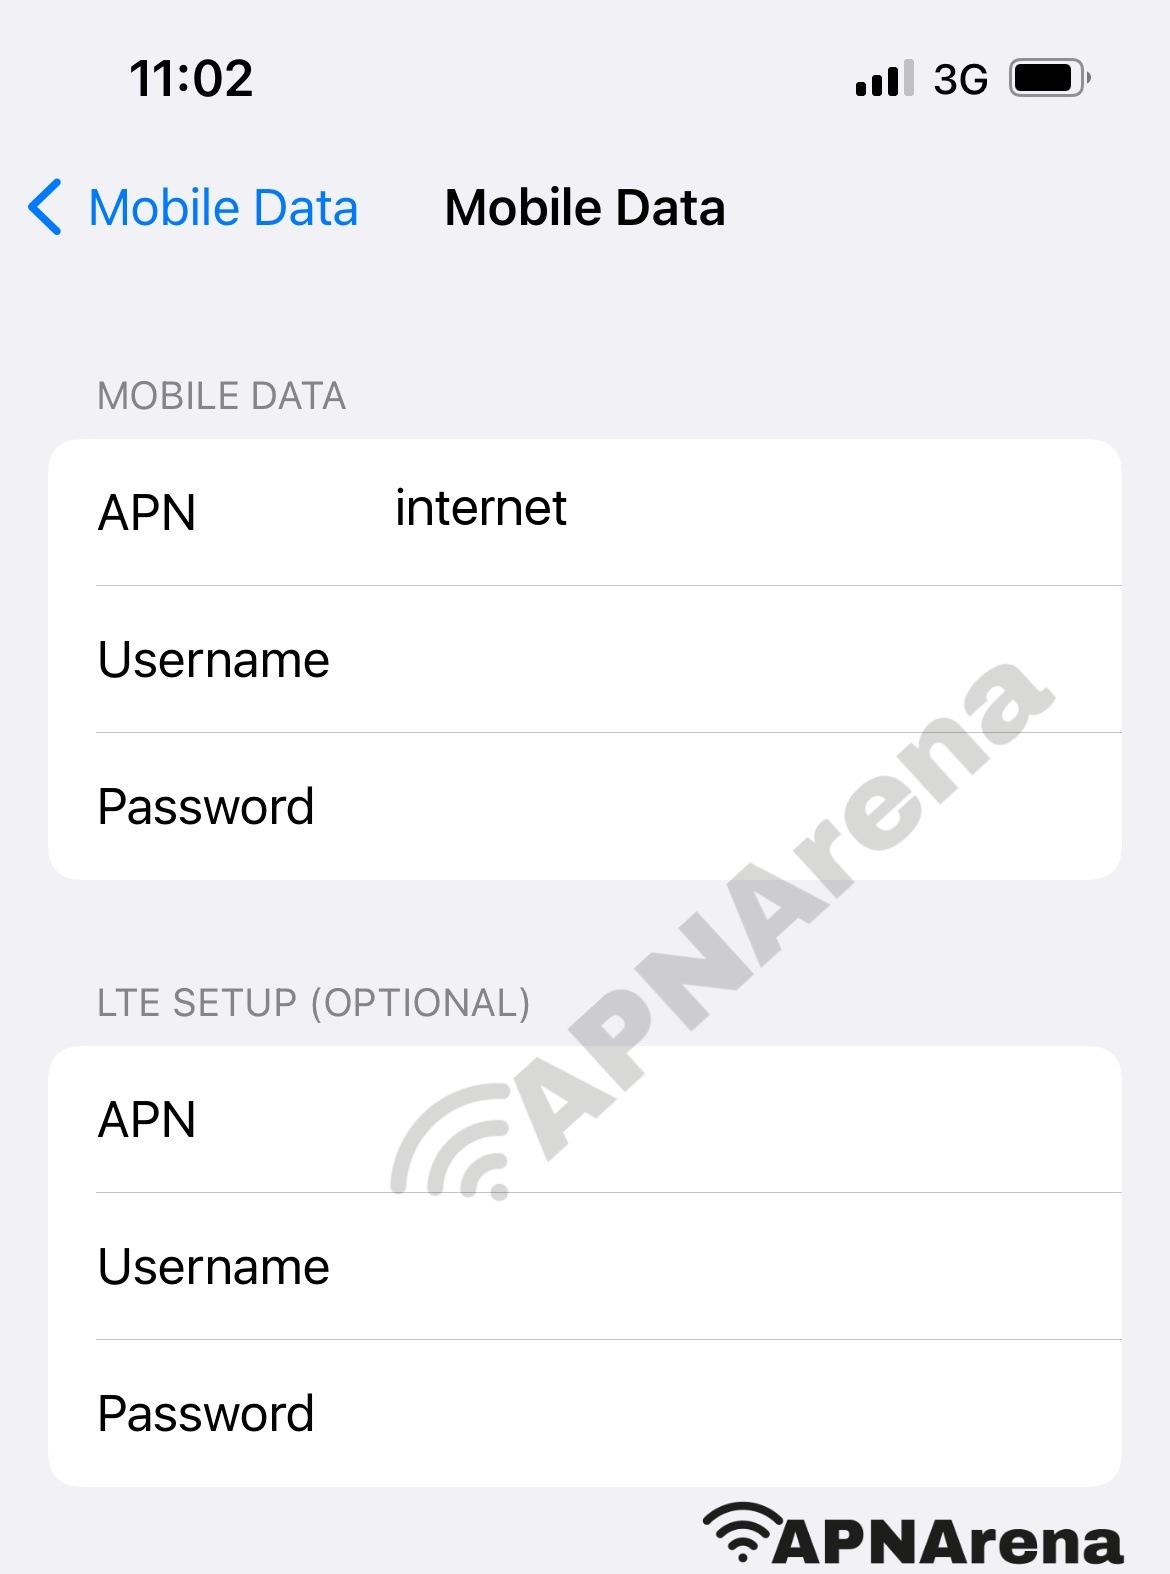 Asia Cell APN Settings for iPhone